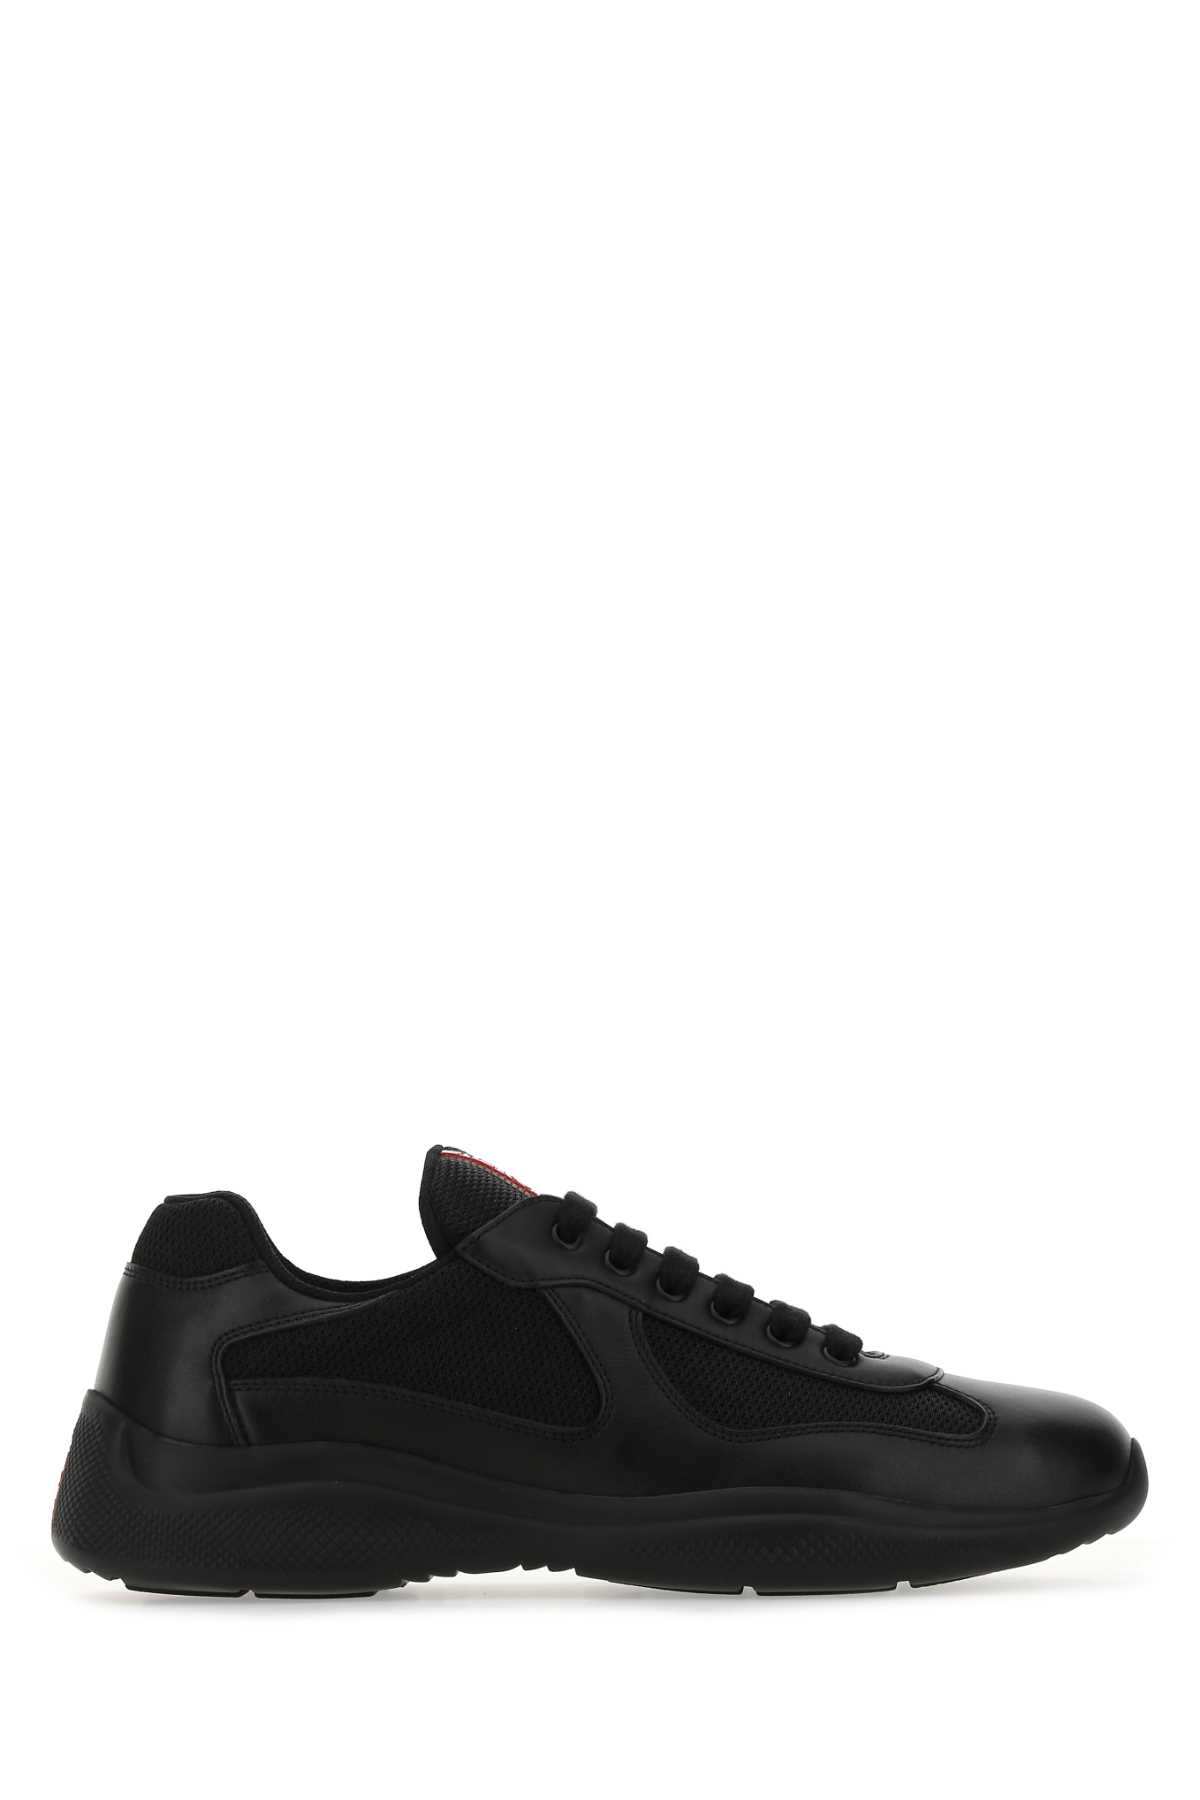 Shop Prada Black Leather And Mesh Sneakers In F0002